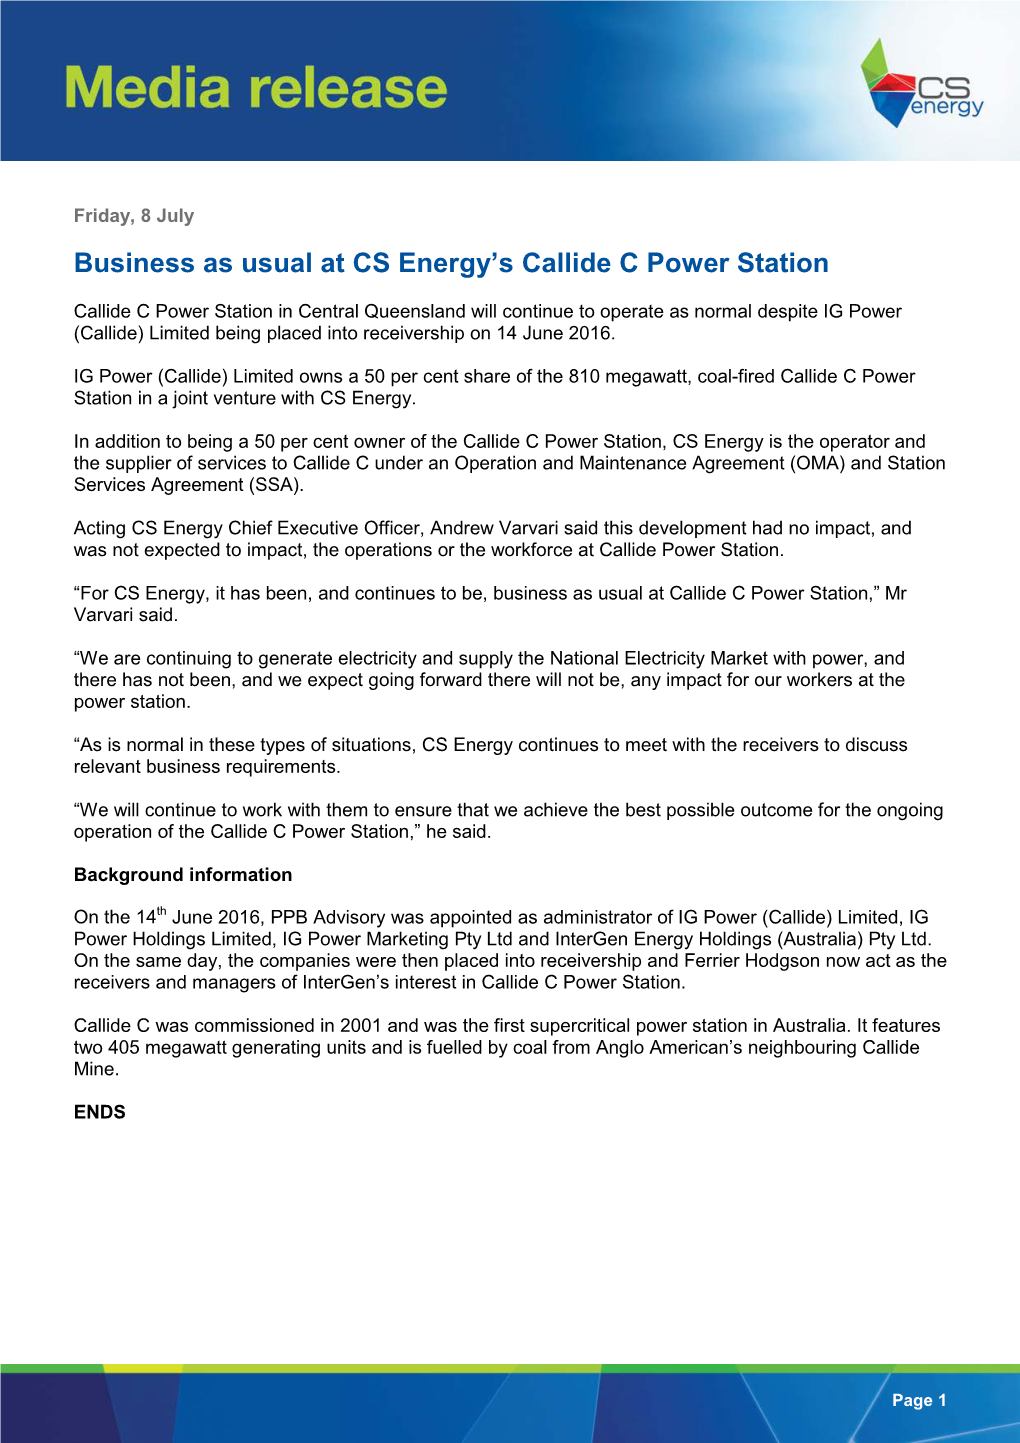 Business As Usual at CS Energy's Callide C Power Station